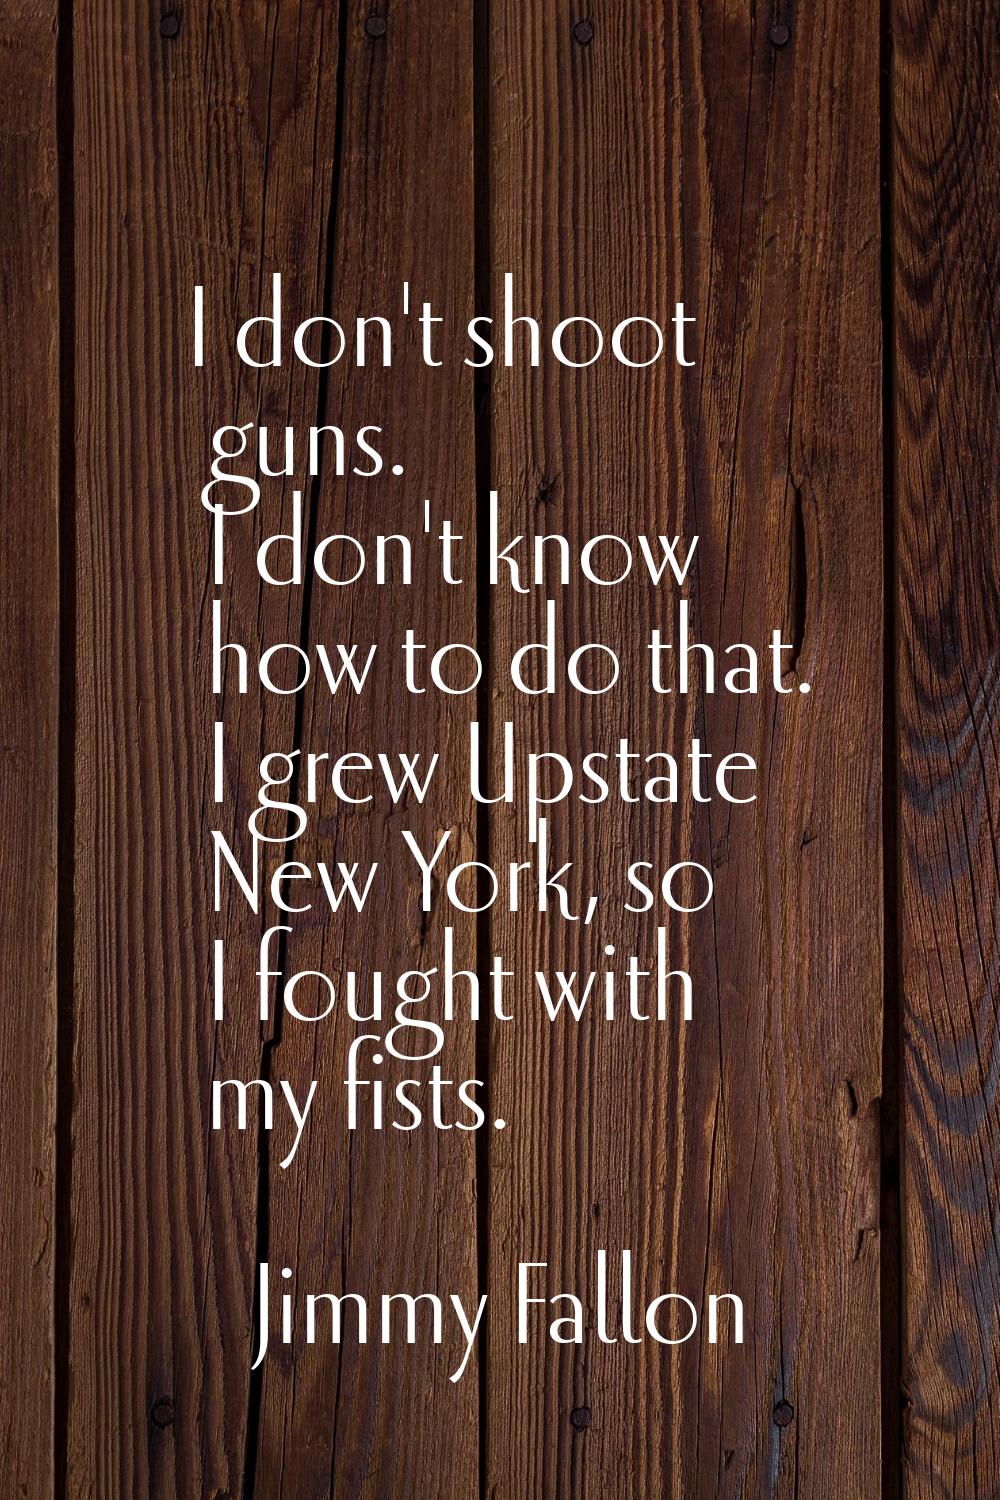 I don't shoot guns. I don't know how to do that. I grew Upstate New York, so I fought with my fists